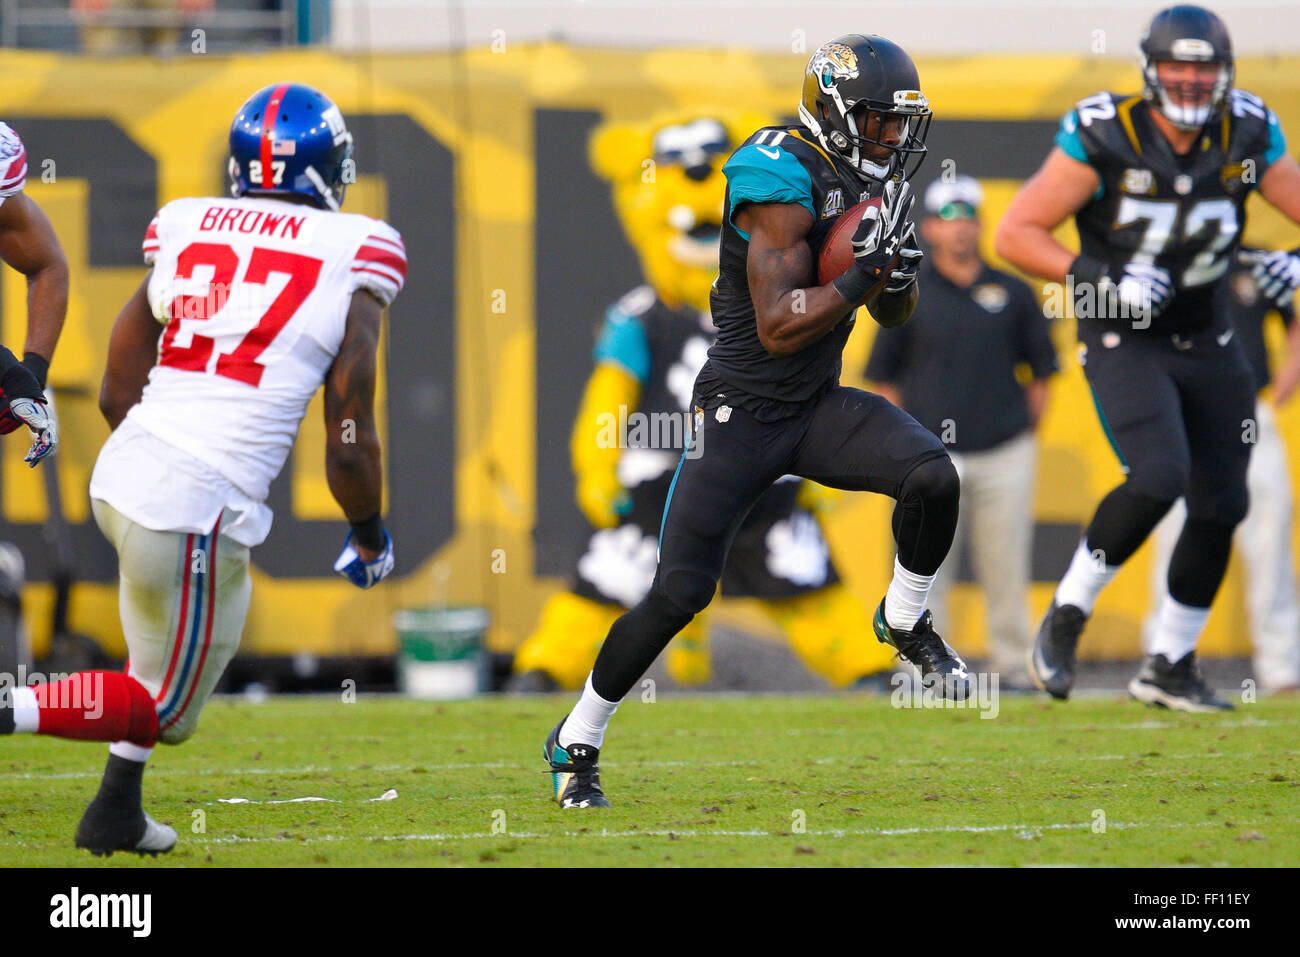 Jacksonville, FL, USA. 30th Nov, 2014. Jacksonville Jaguars wide receiver Marqise Lee (11) runs upfield with the ball during an NFL game against the New York Giants at EverBank Field on Nov. 30, 2014 in Jacksonville, Florida. The Jaguars won 25-24.ZUMA PRESS/Scott A. Miller © Scott A. Miller/ZUMA Wire/Alamy Live News Stock Photo